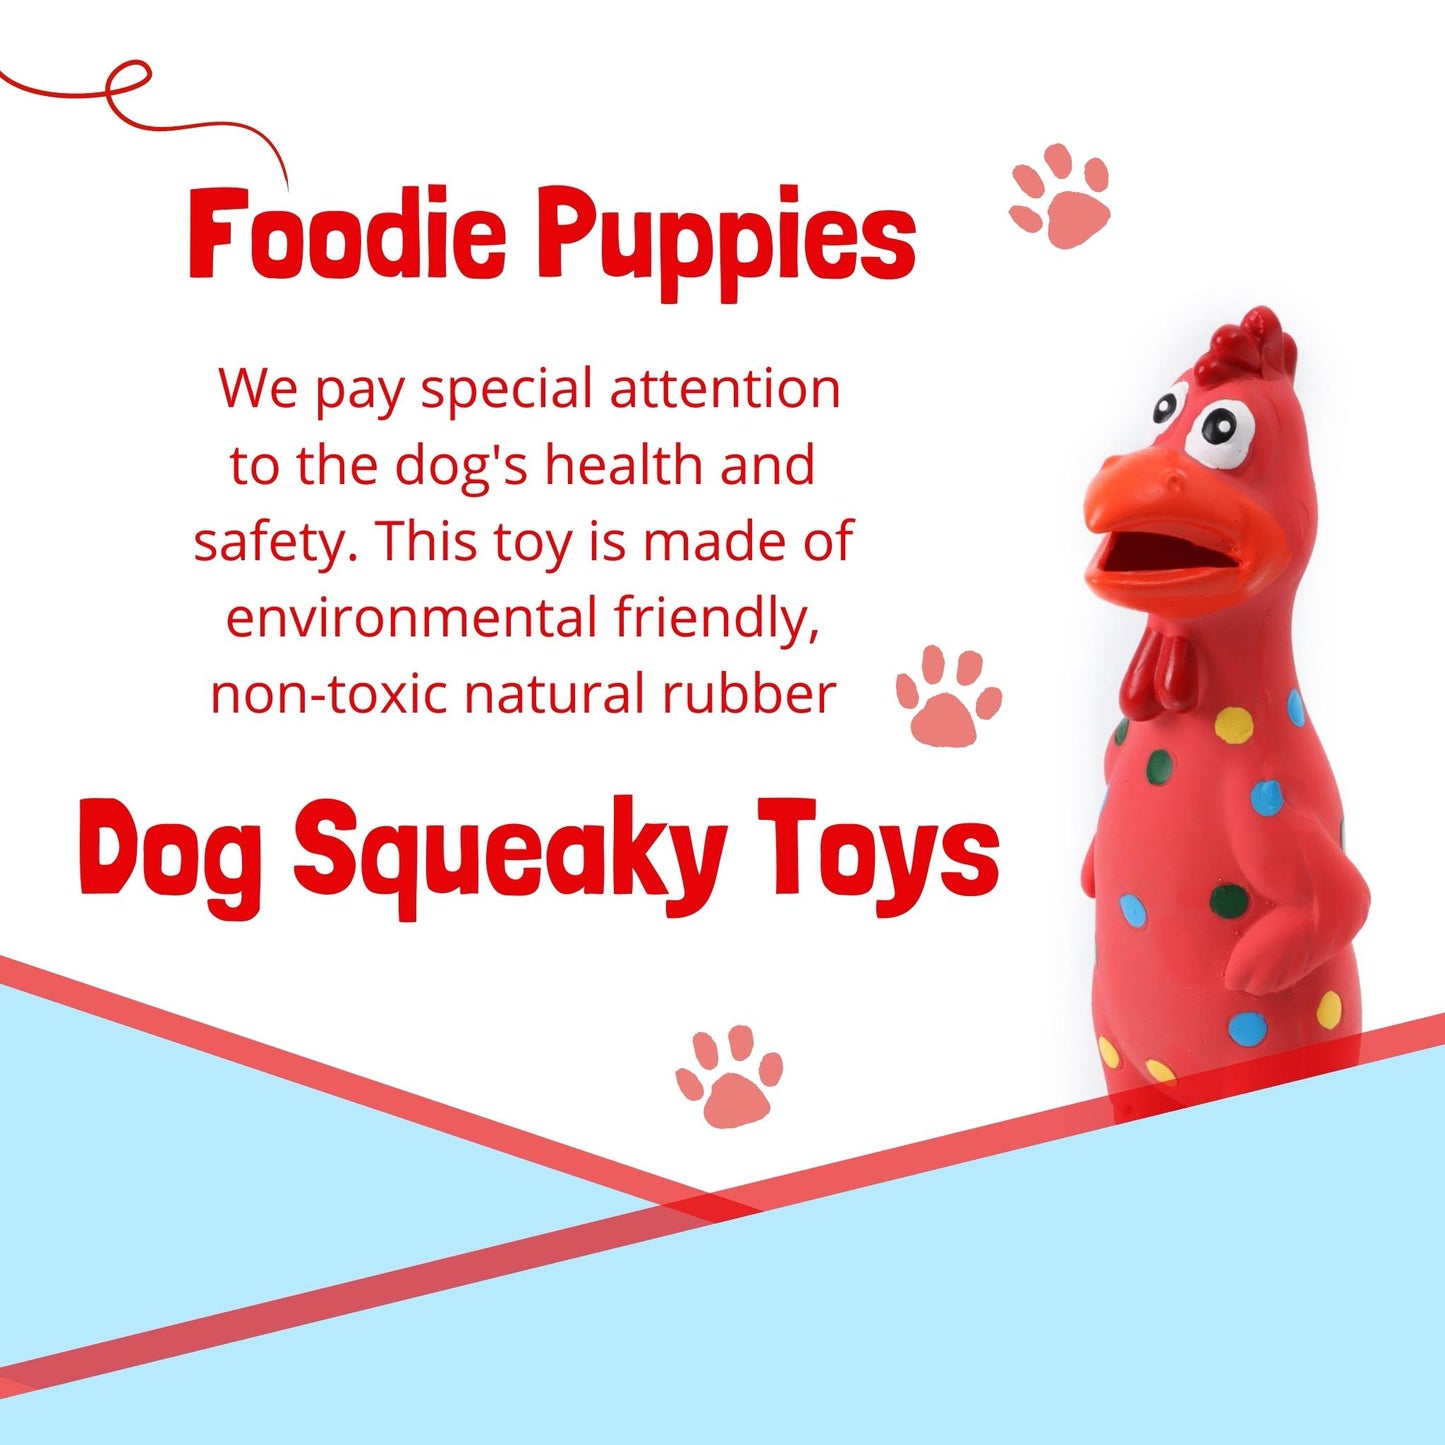 Foodie Puppies Latex Rubber Squeaky Dog Chew Toy - Pink Hen